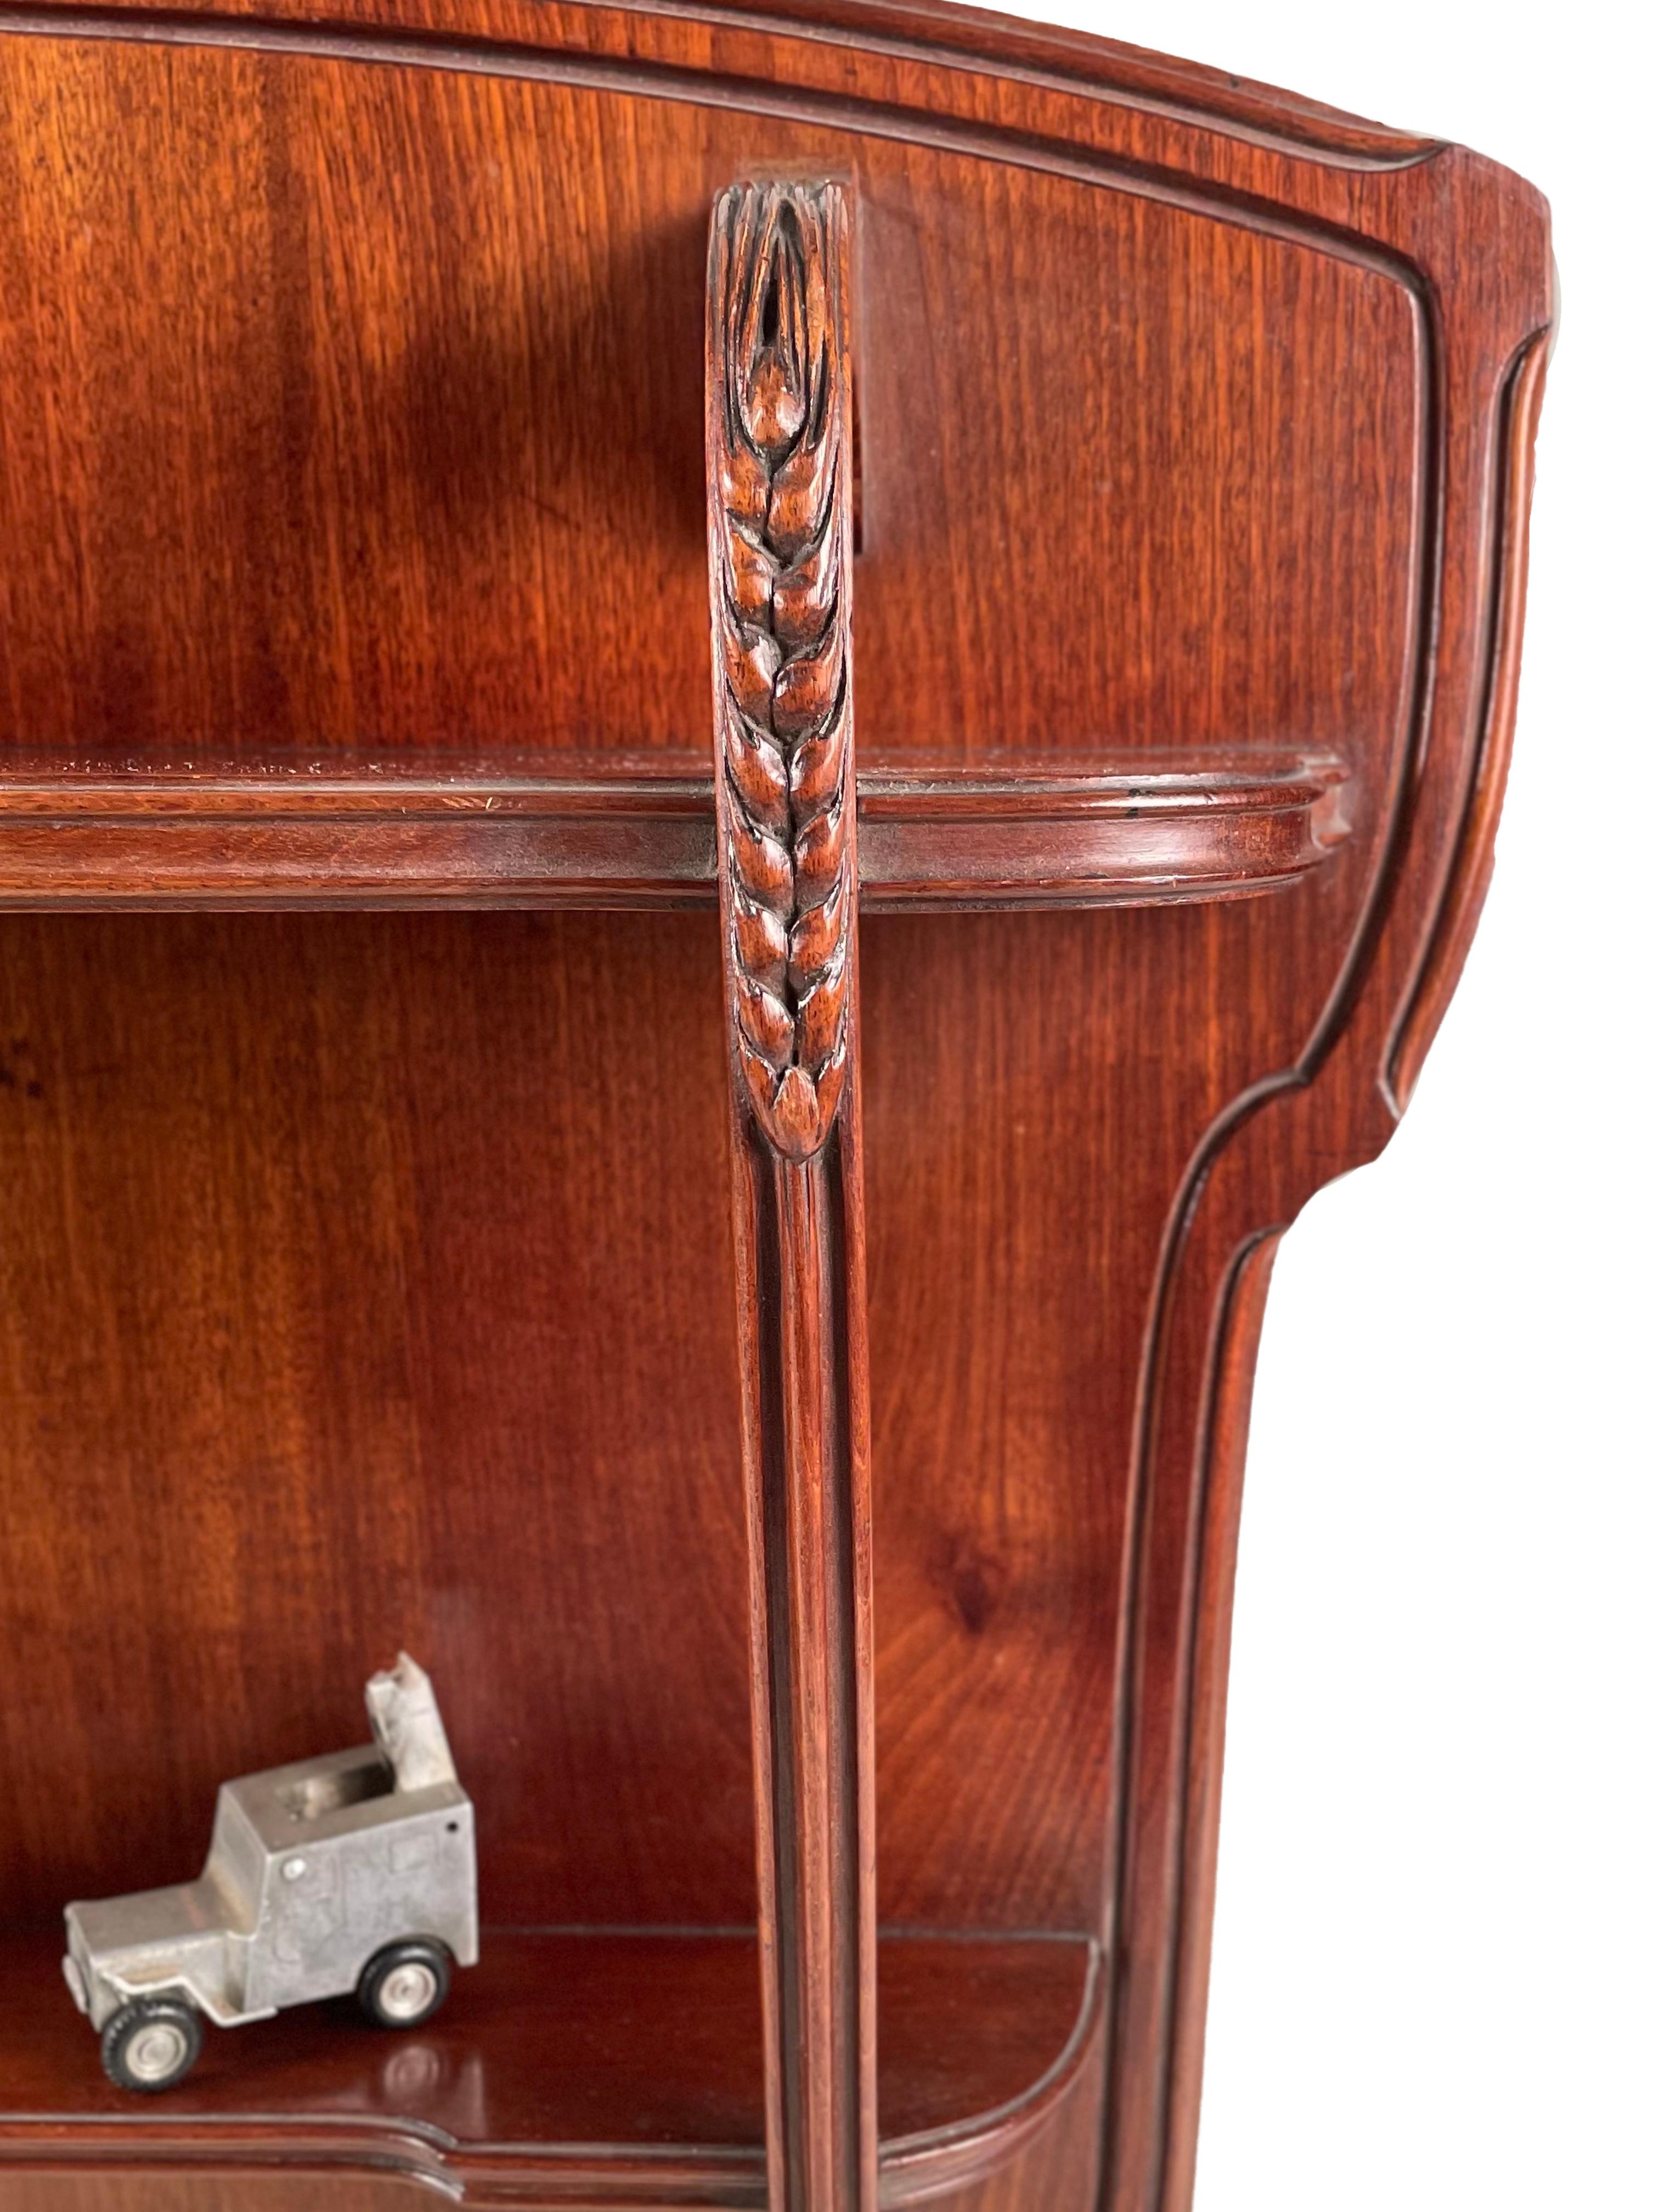 Early 20th Century French Art Nouveau Carved Wall Shelf by, Louis Majorelle In Good Condition For Sale In Englewood, NJ